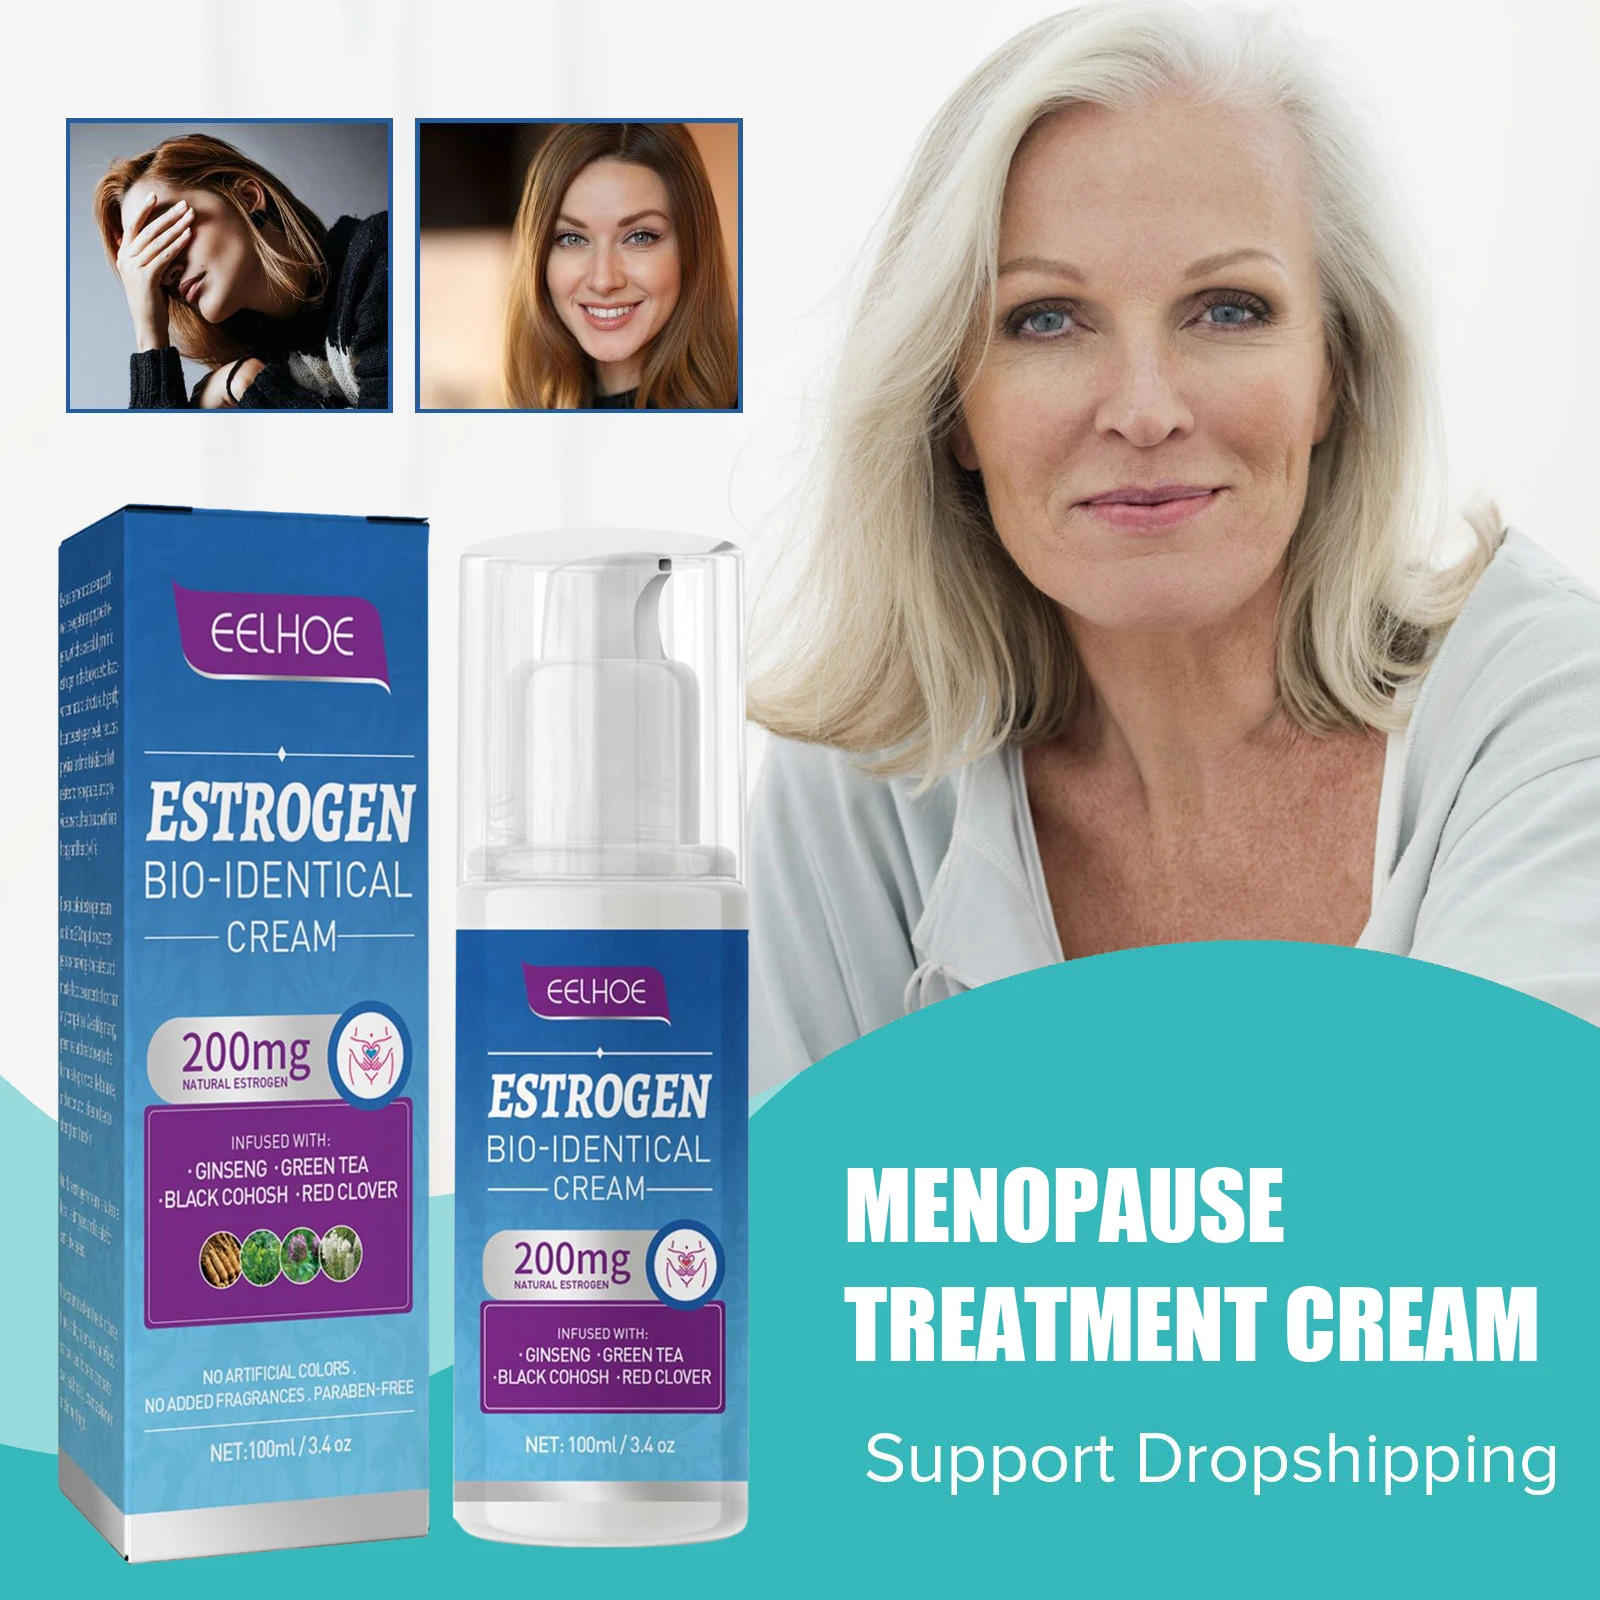 

Menopause Cream Treatment Hot Flashes Fatigue Relief Products Emotional Fluctuation Fight Stress Anti Anxiety Progesterone Cream